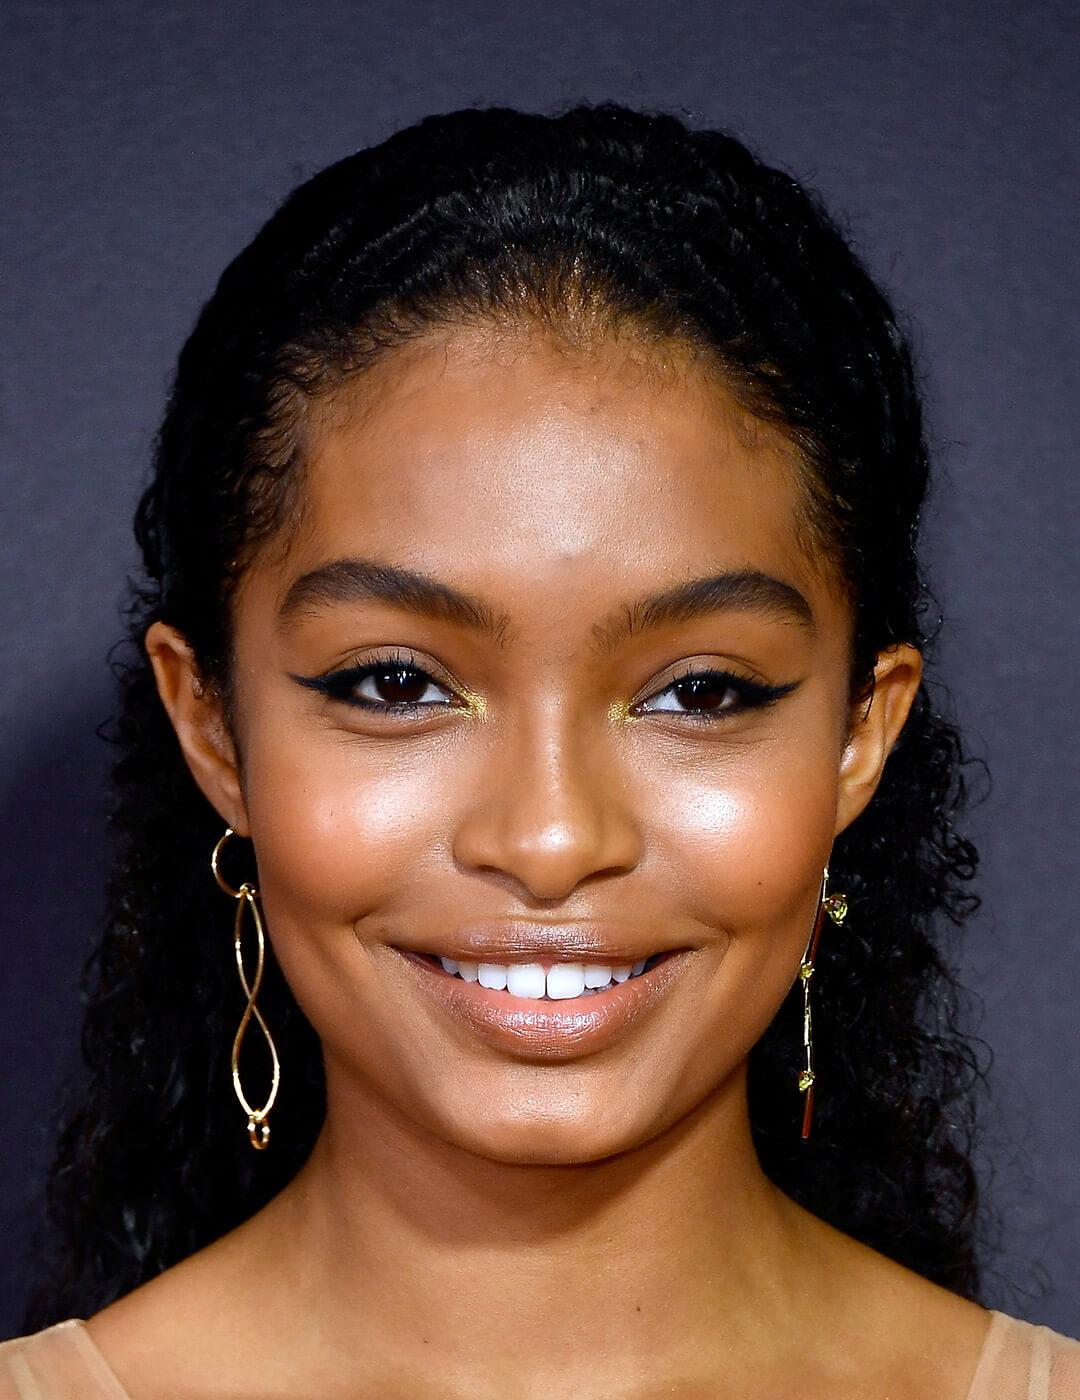 Close-up look of Yara Shahidi rocking a simple yet bold look featuring cat eyeliner, with a touch of gold lip gloss wearing a gold dangling earring